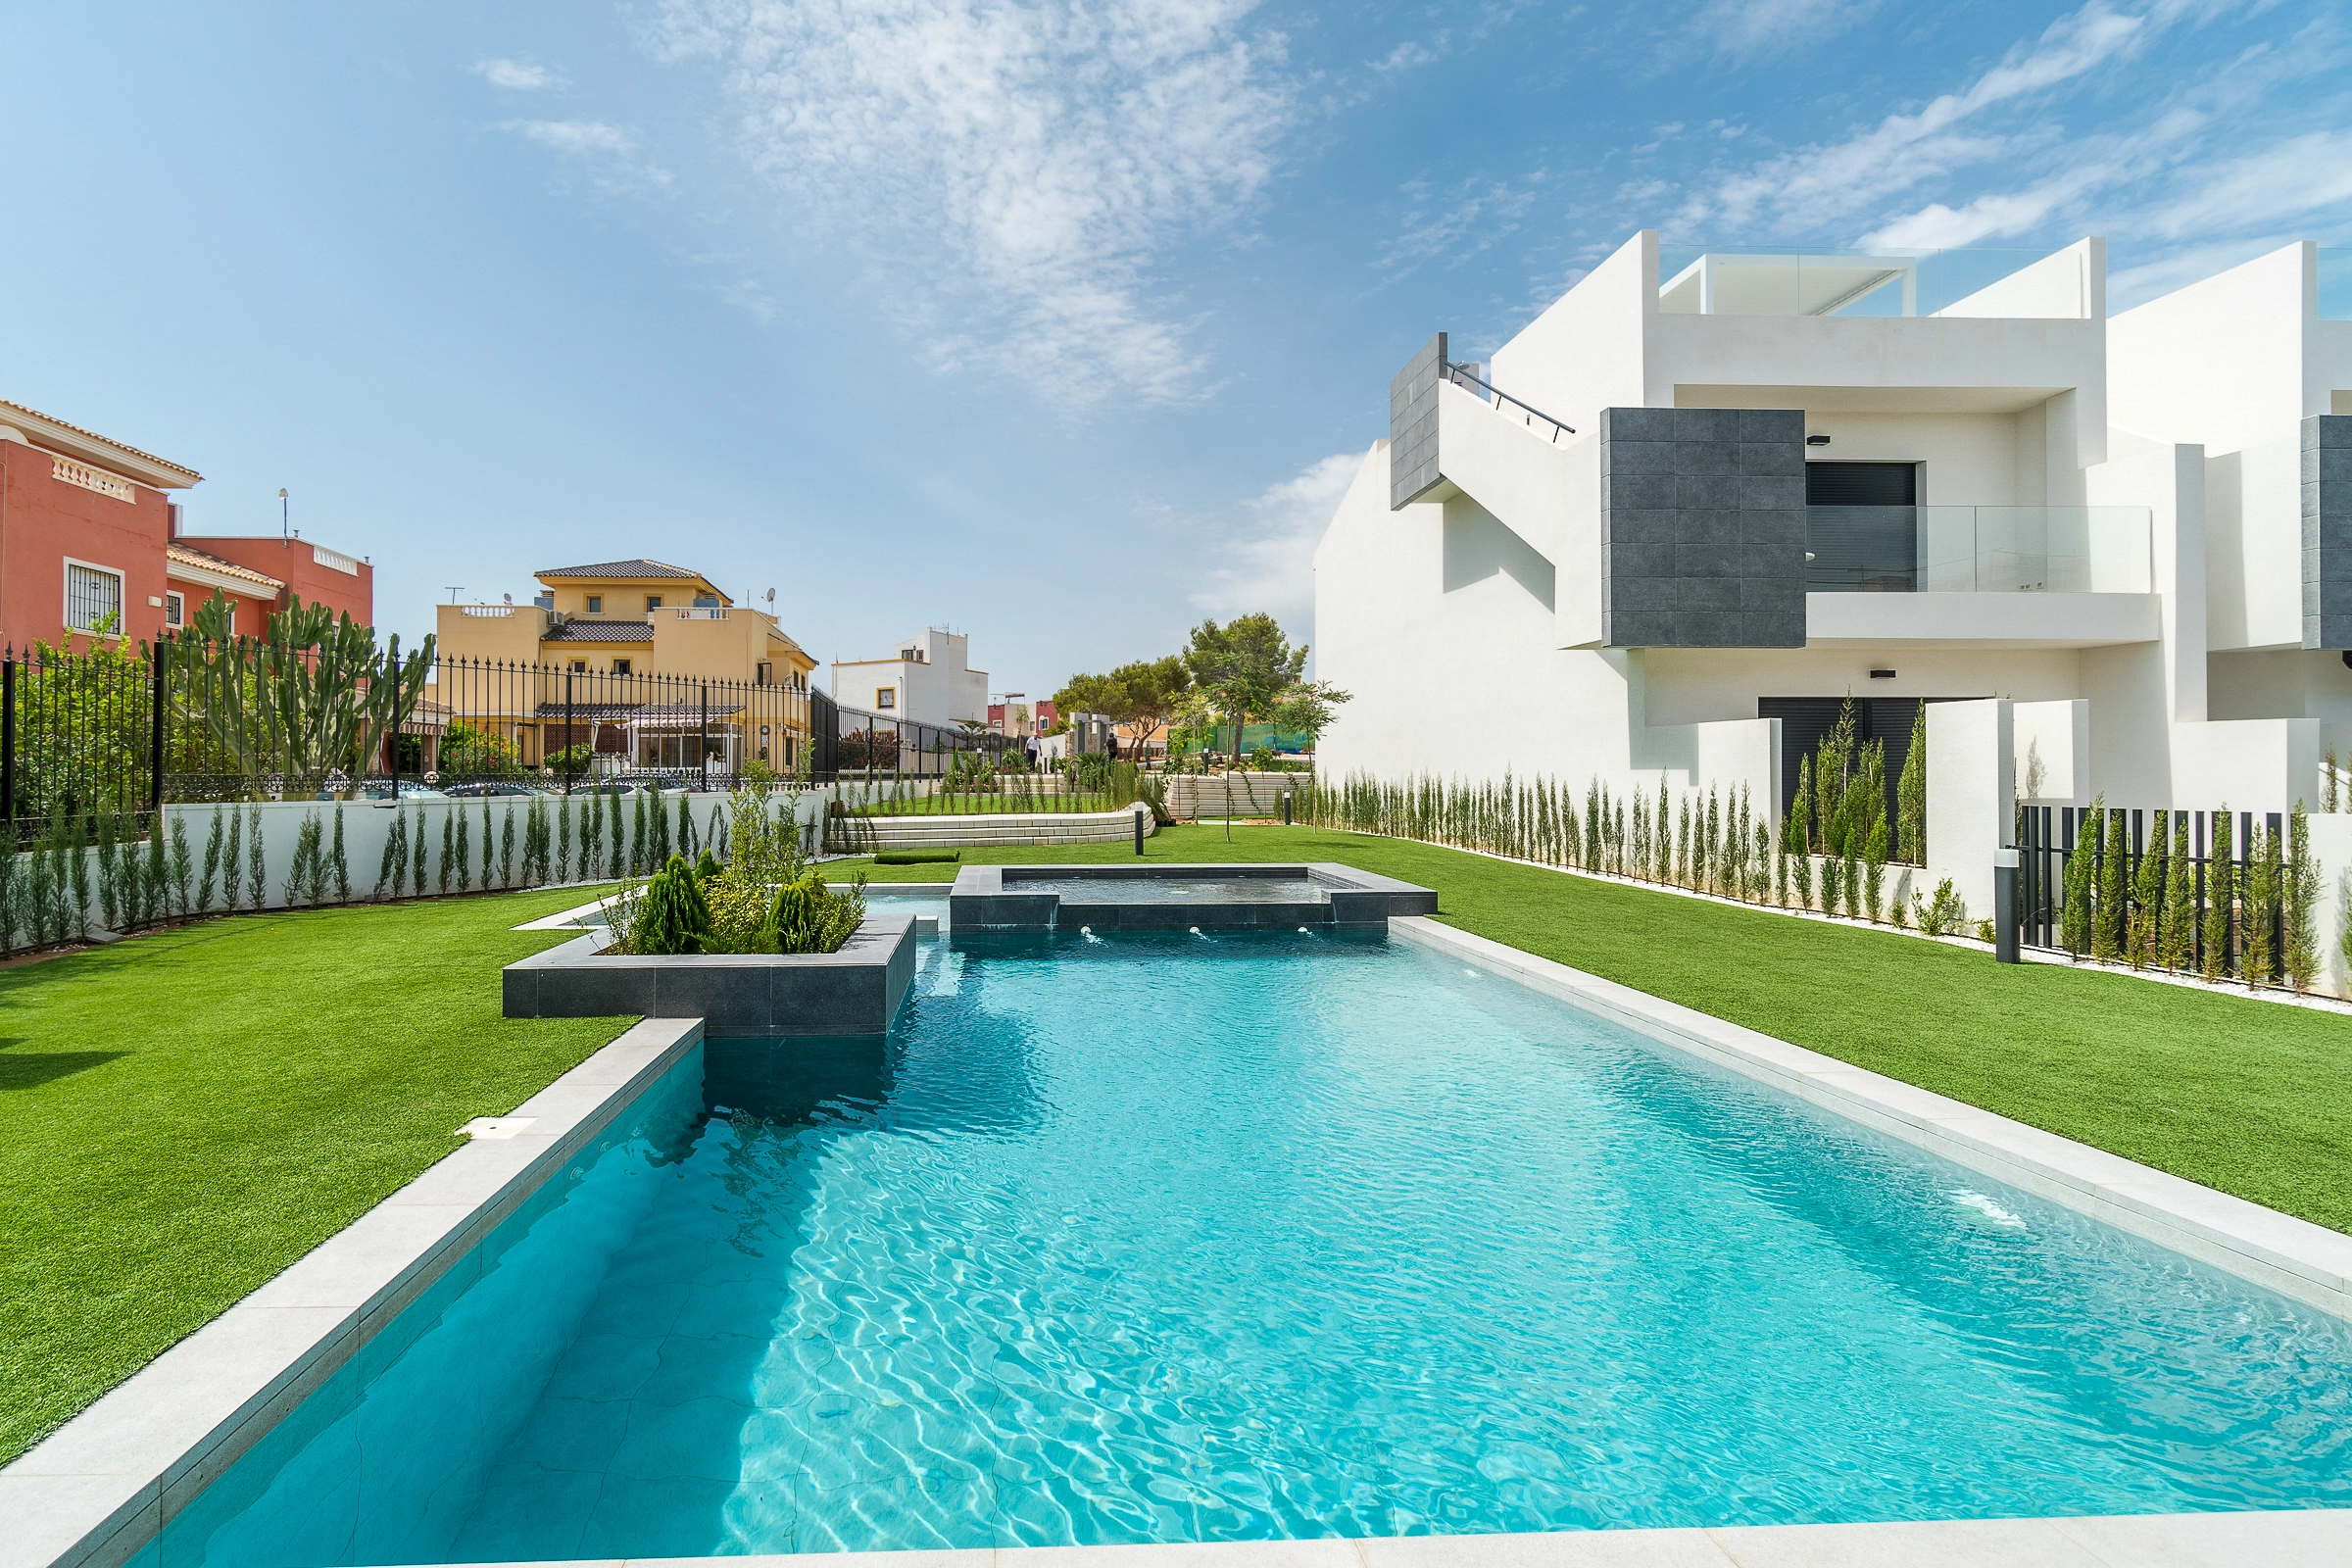 Discover a luxurious living experience in the heart of Torrevieja, one of the best areas of tourist interest on the Costa Blanca. This exclusive complex features 10 high-end apartments, offering stunning views of the Laguna Rosa de Torrevieja and easy access to the renowned beaches of Torrevieja and Orihuela Costa.